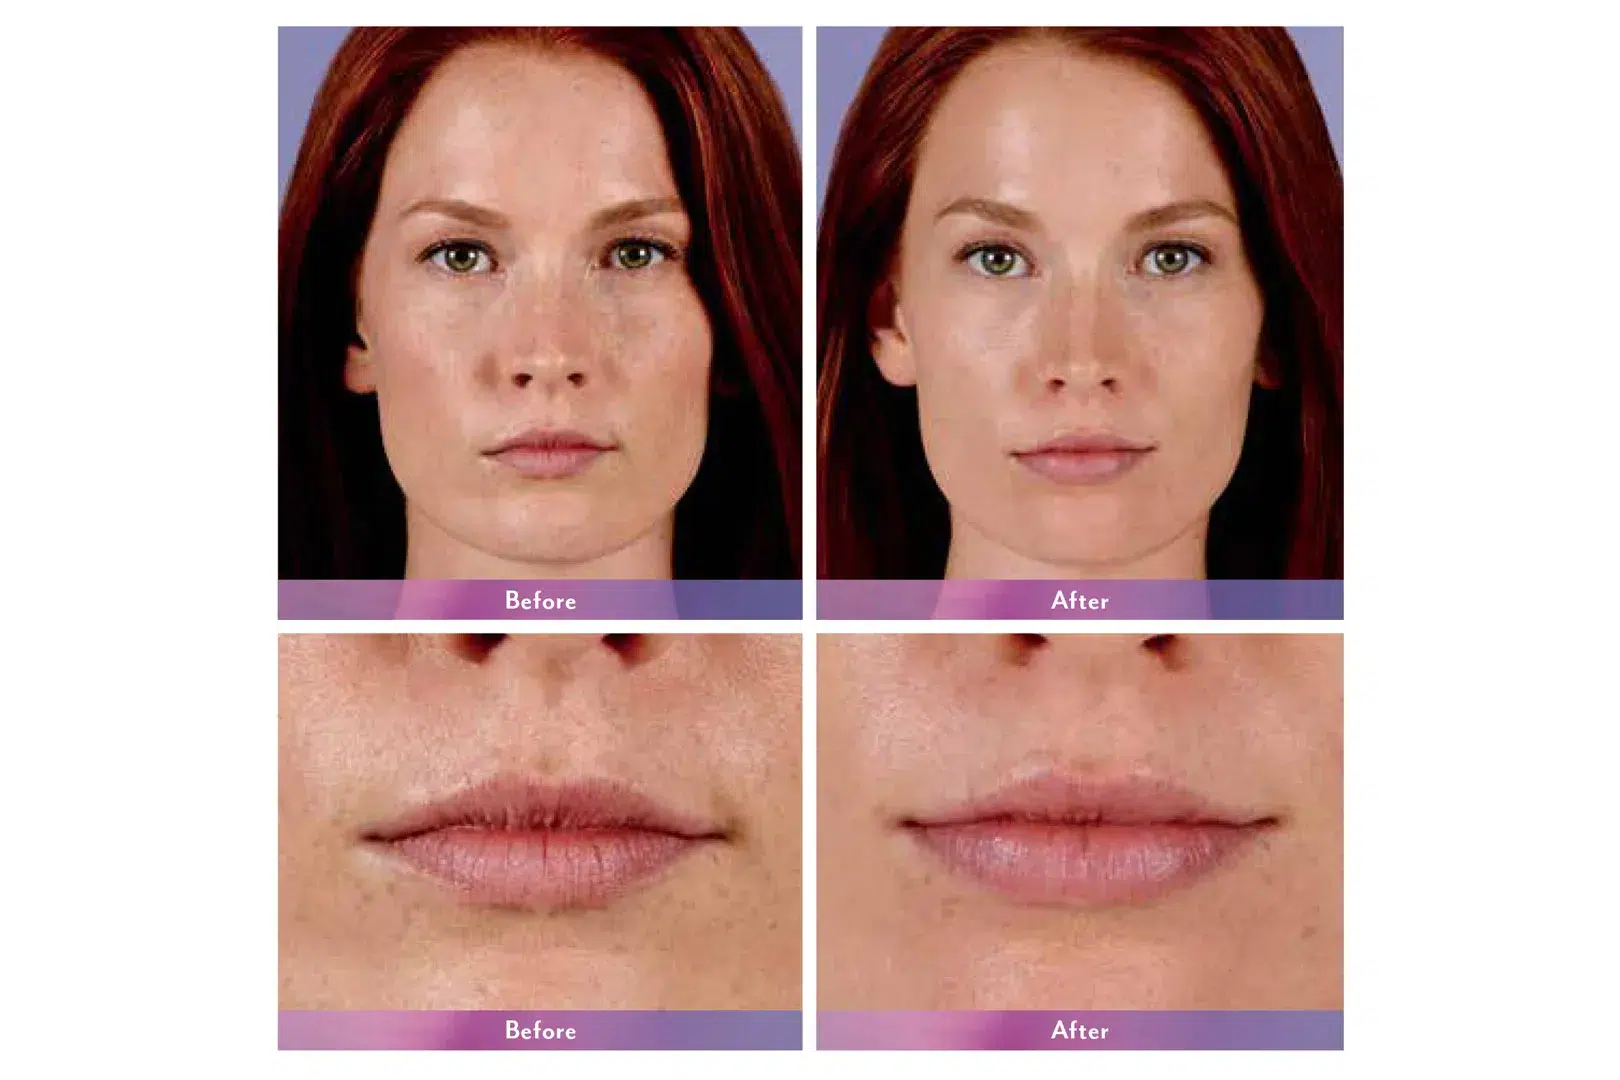 Womans's face before and after Juvederm treatment